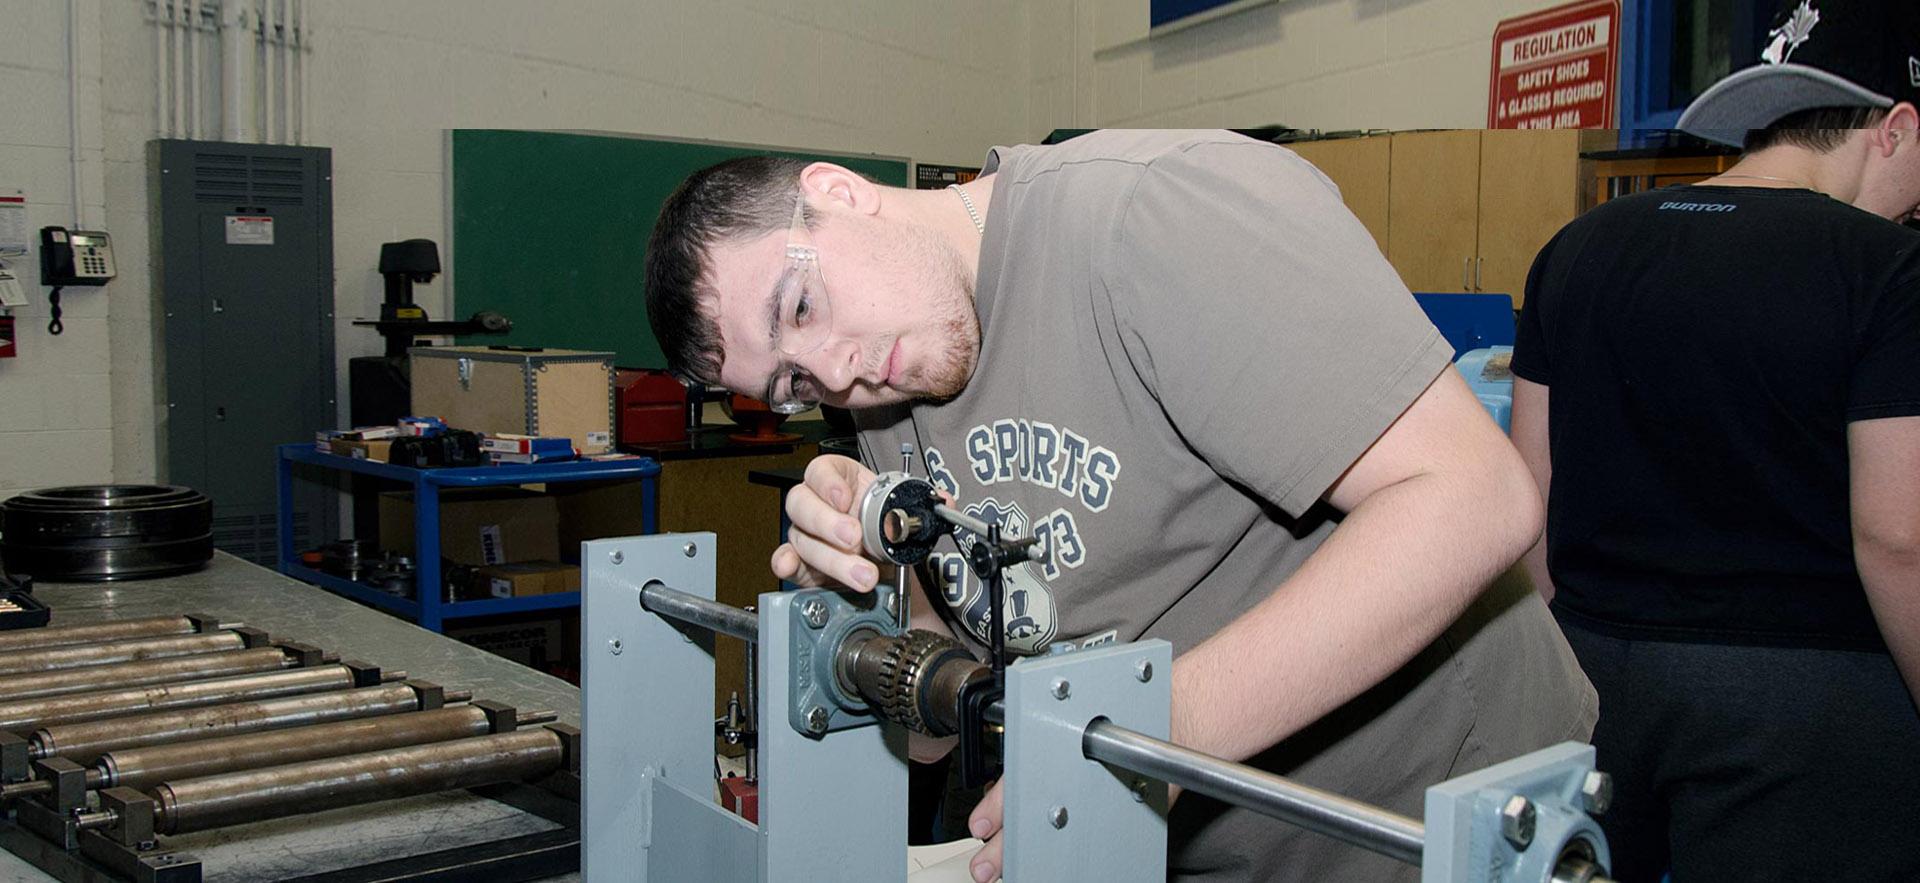 A male Instrumentation and Control Engineering Technician takes a careful measurement. 